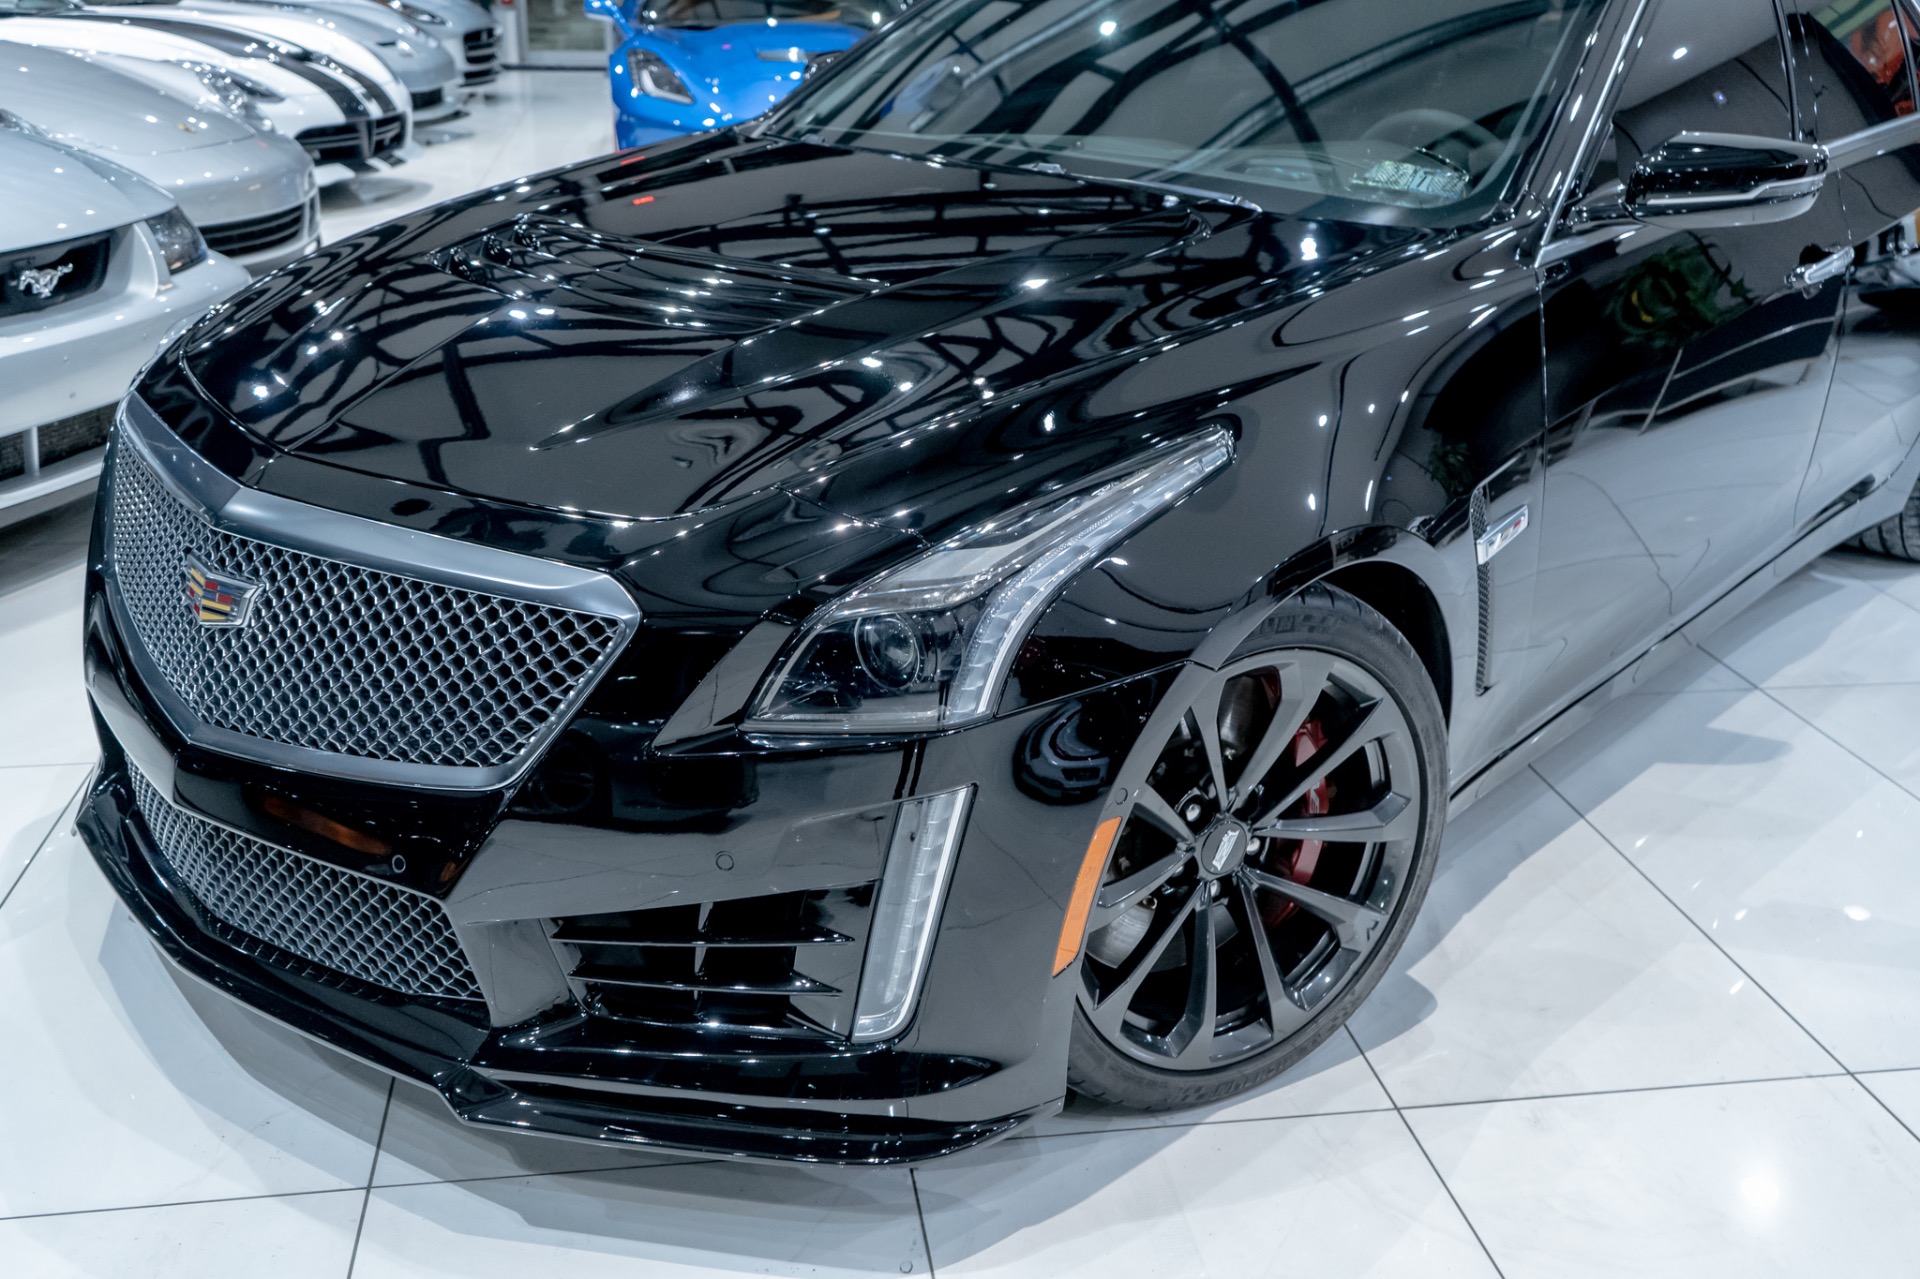 Used-2017-Cadillac-CTS-V-62L-V8-Supercharged-Low-Miles-Excellent-Condition